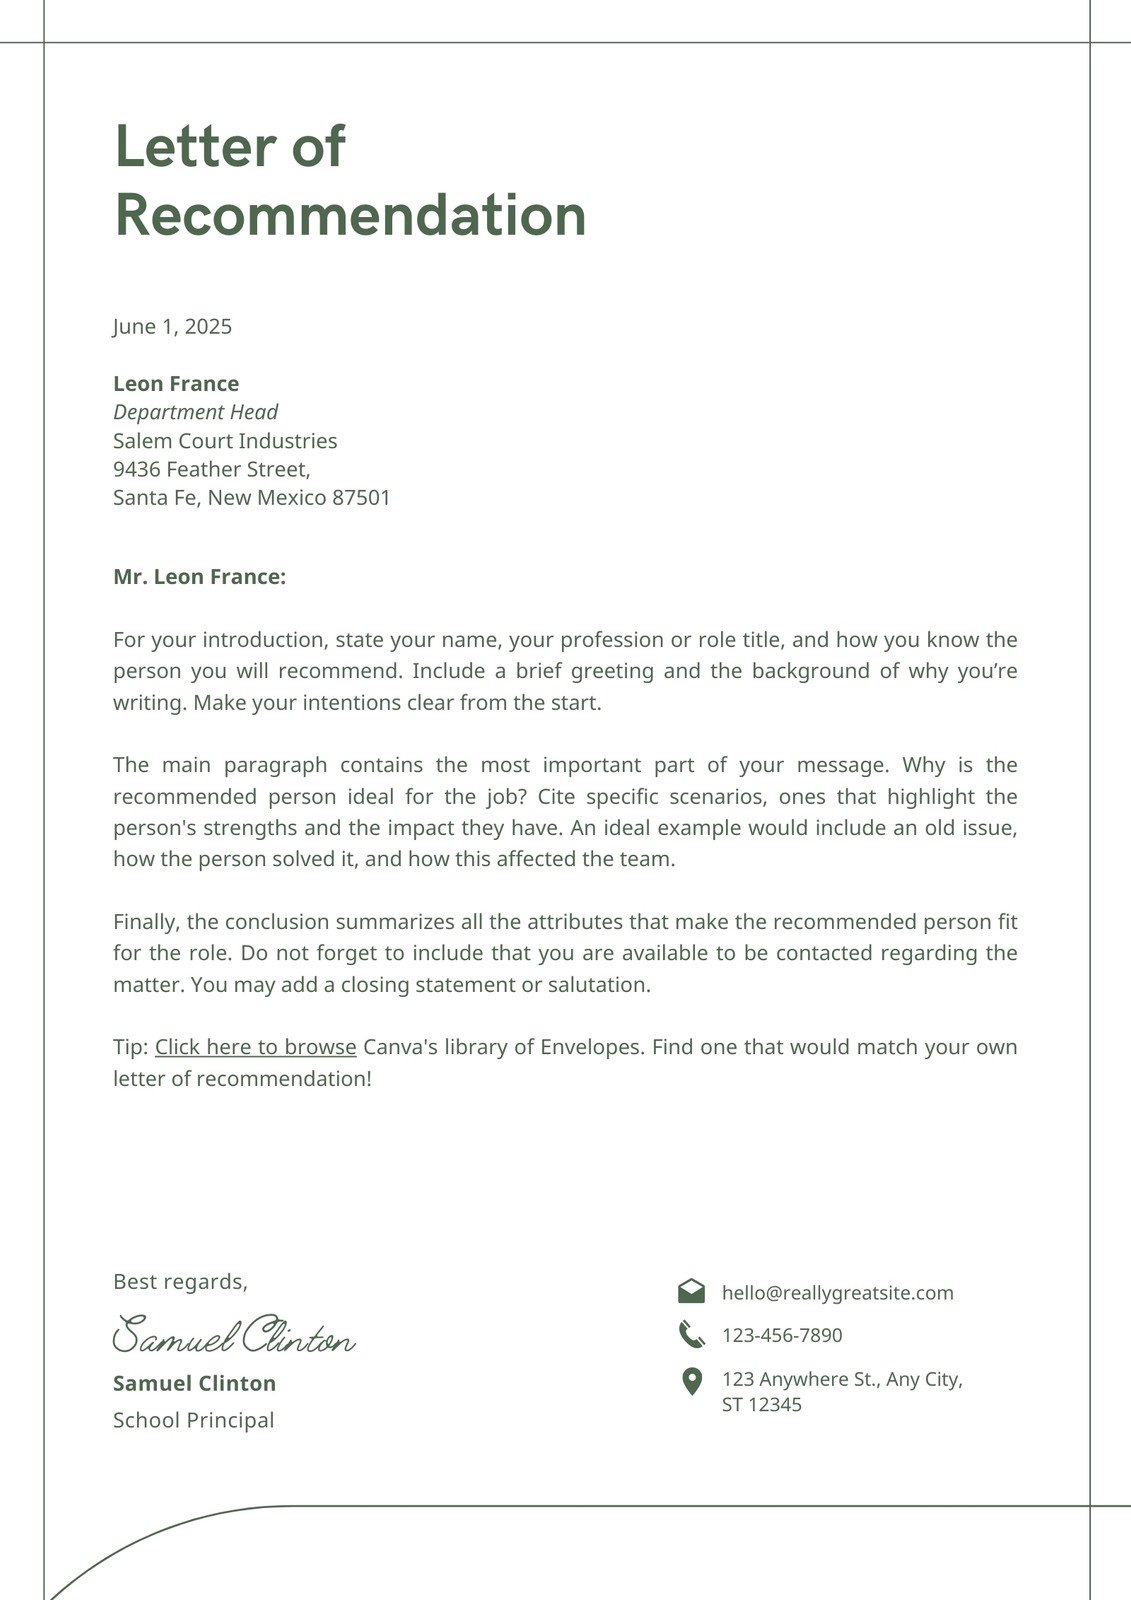 Free printable letter of recommendation templates | Canva